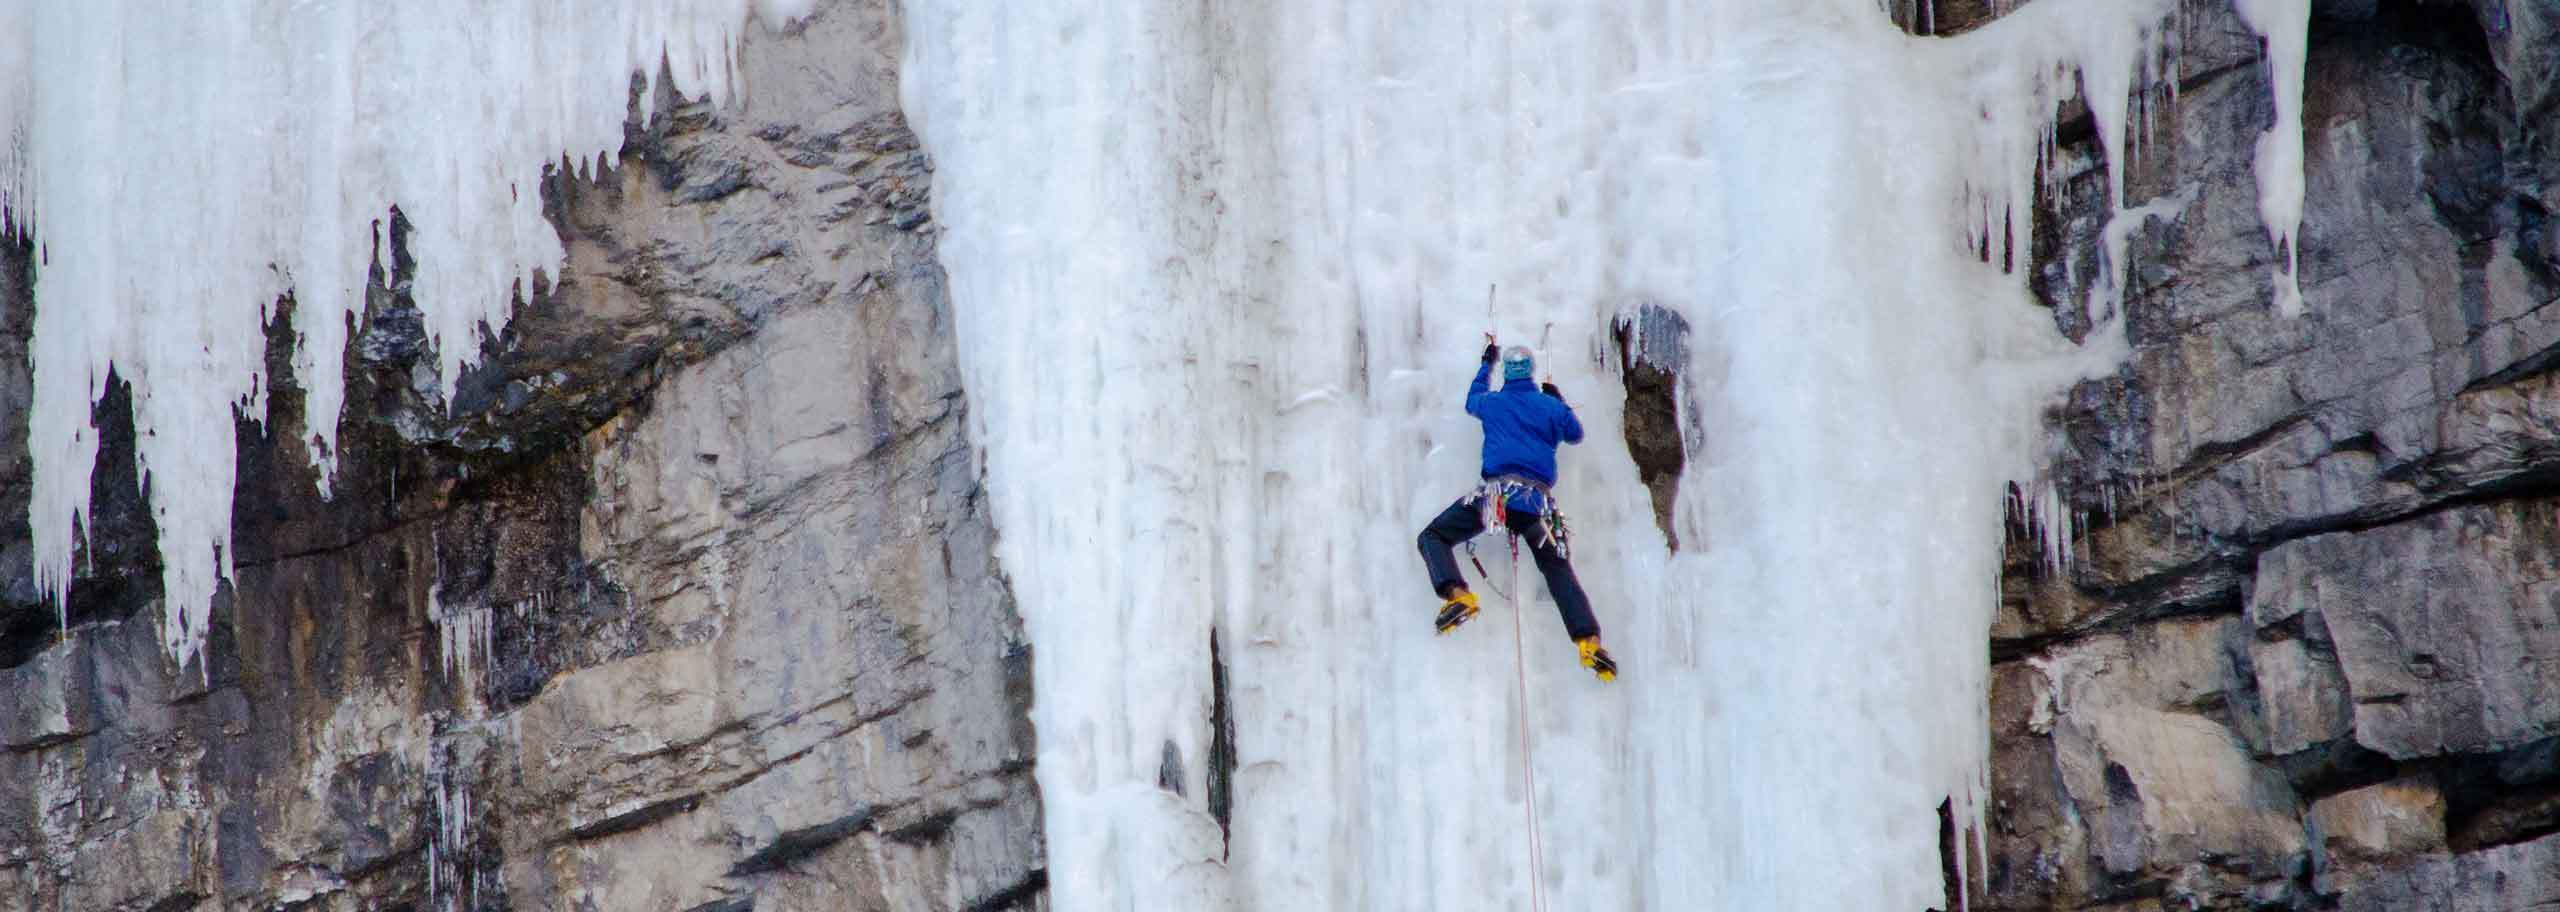 Ice Climbing in Cogne, Courses & Multi-pitch Routes